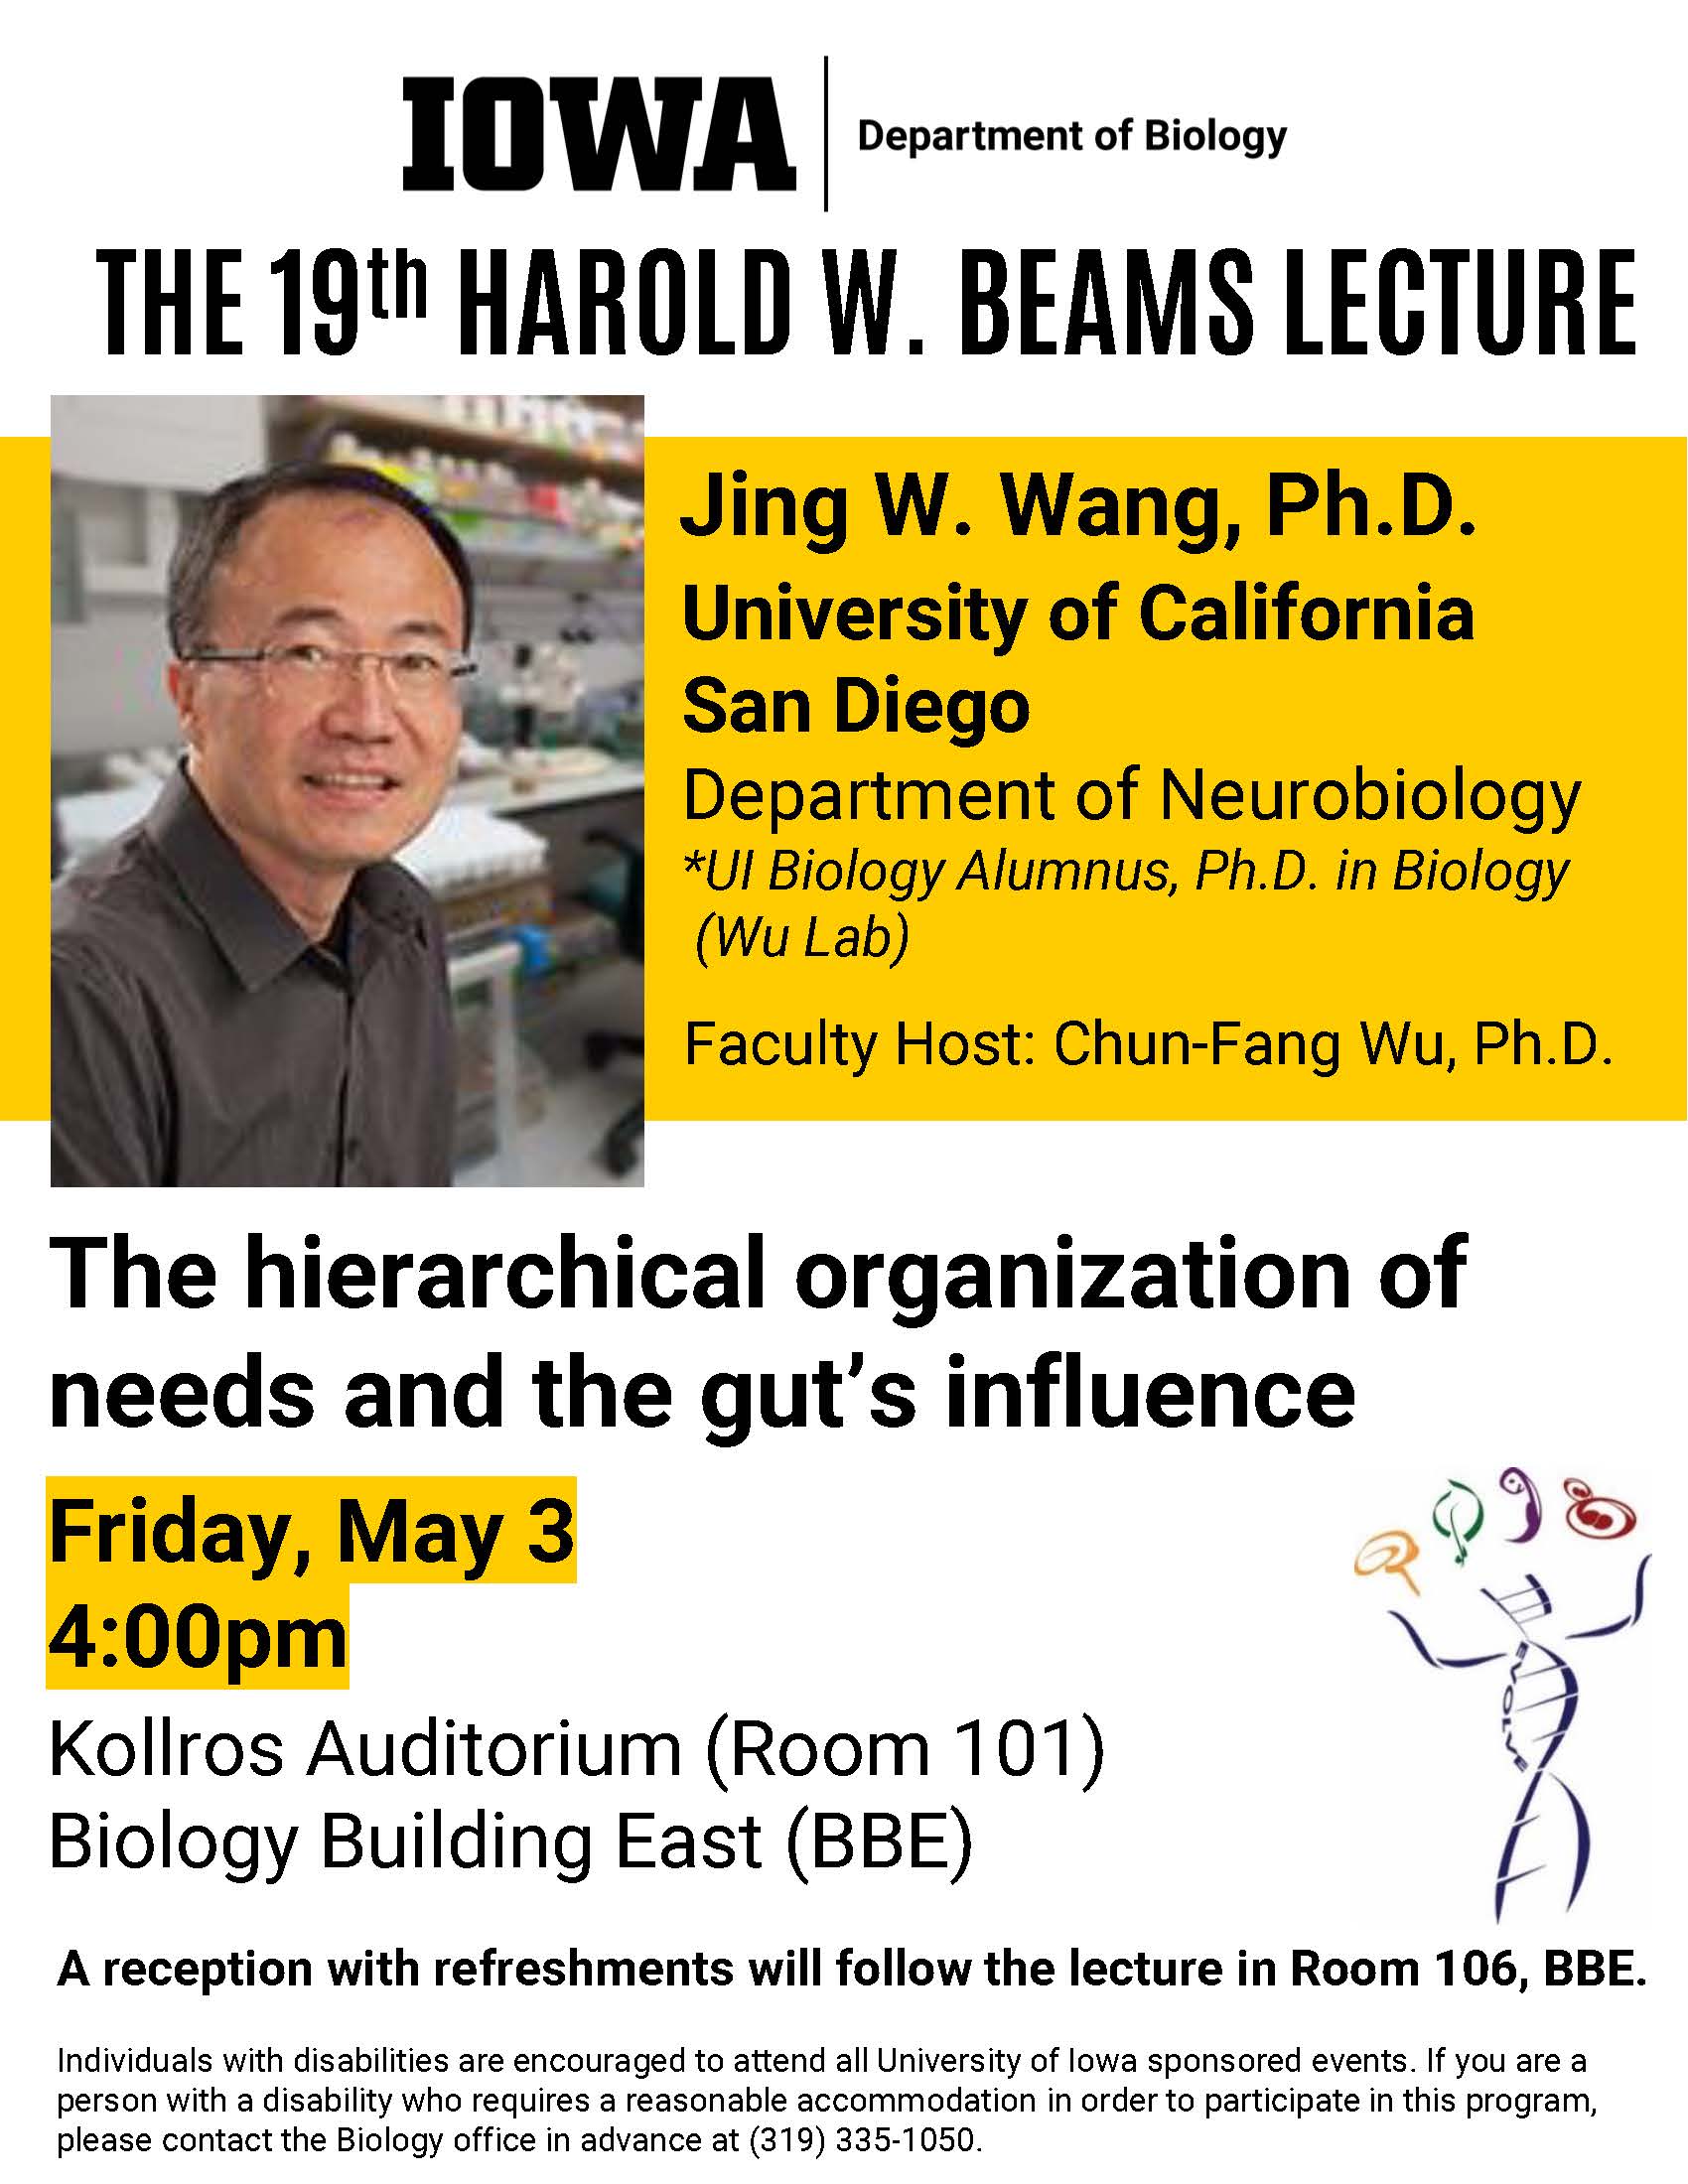 The 19th Harold W. Beams Lecture: "The hierarchical organization of needs and the gut's influence" promotional image